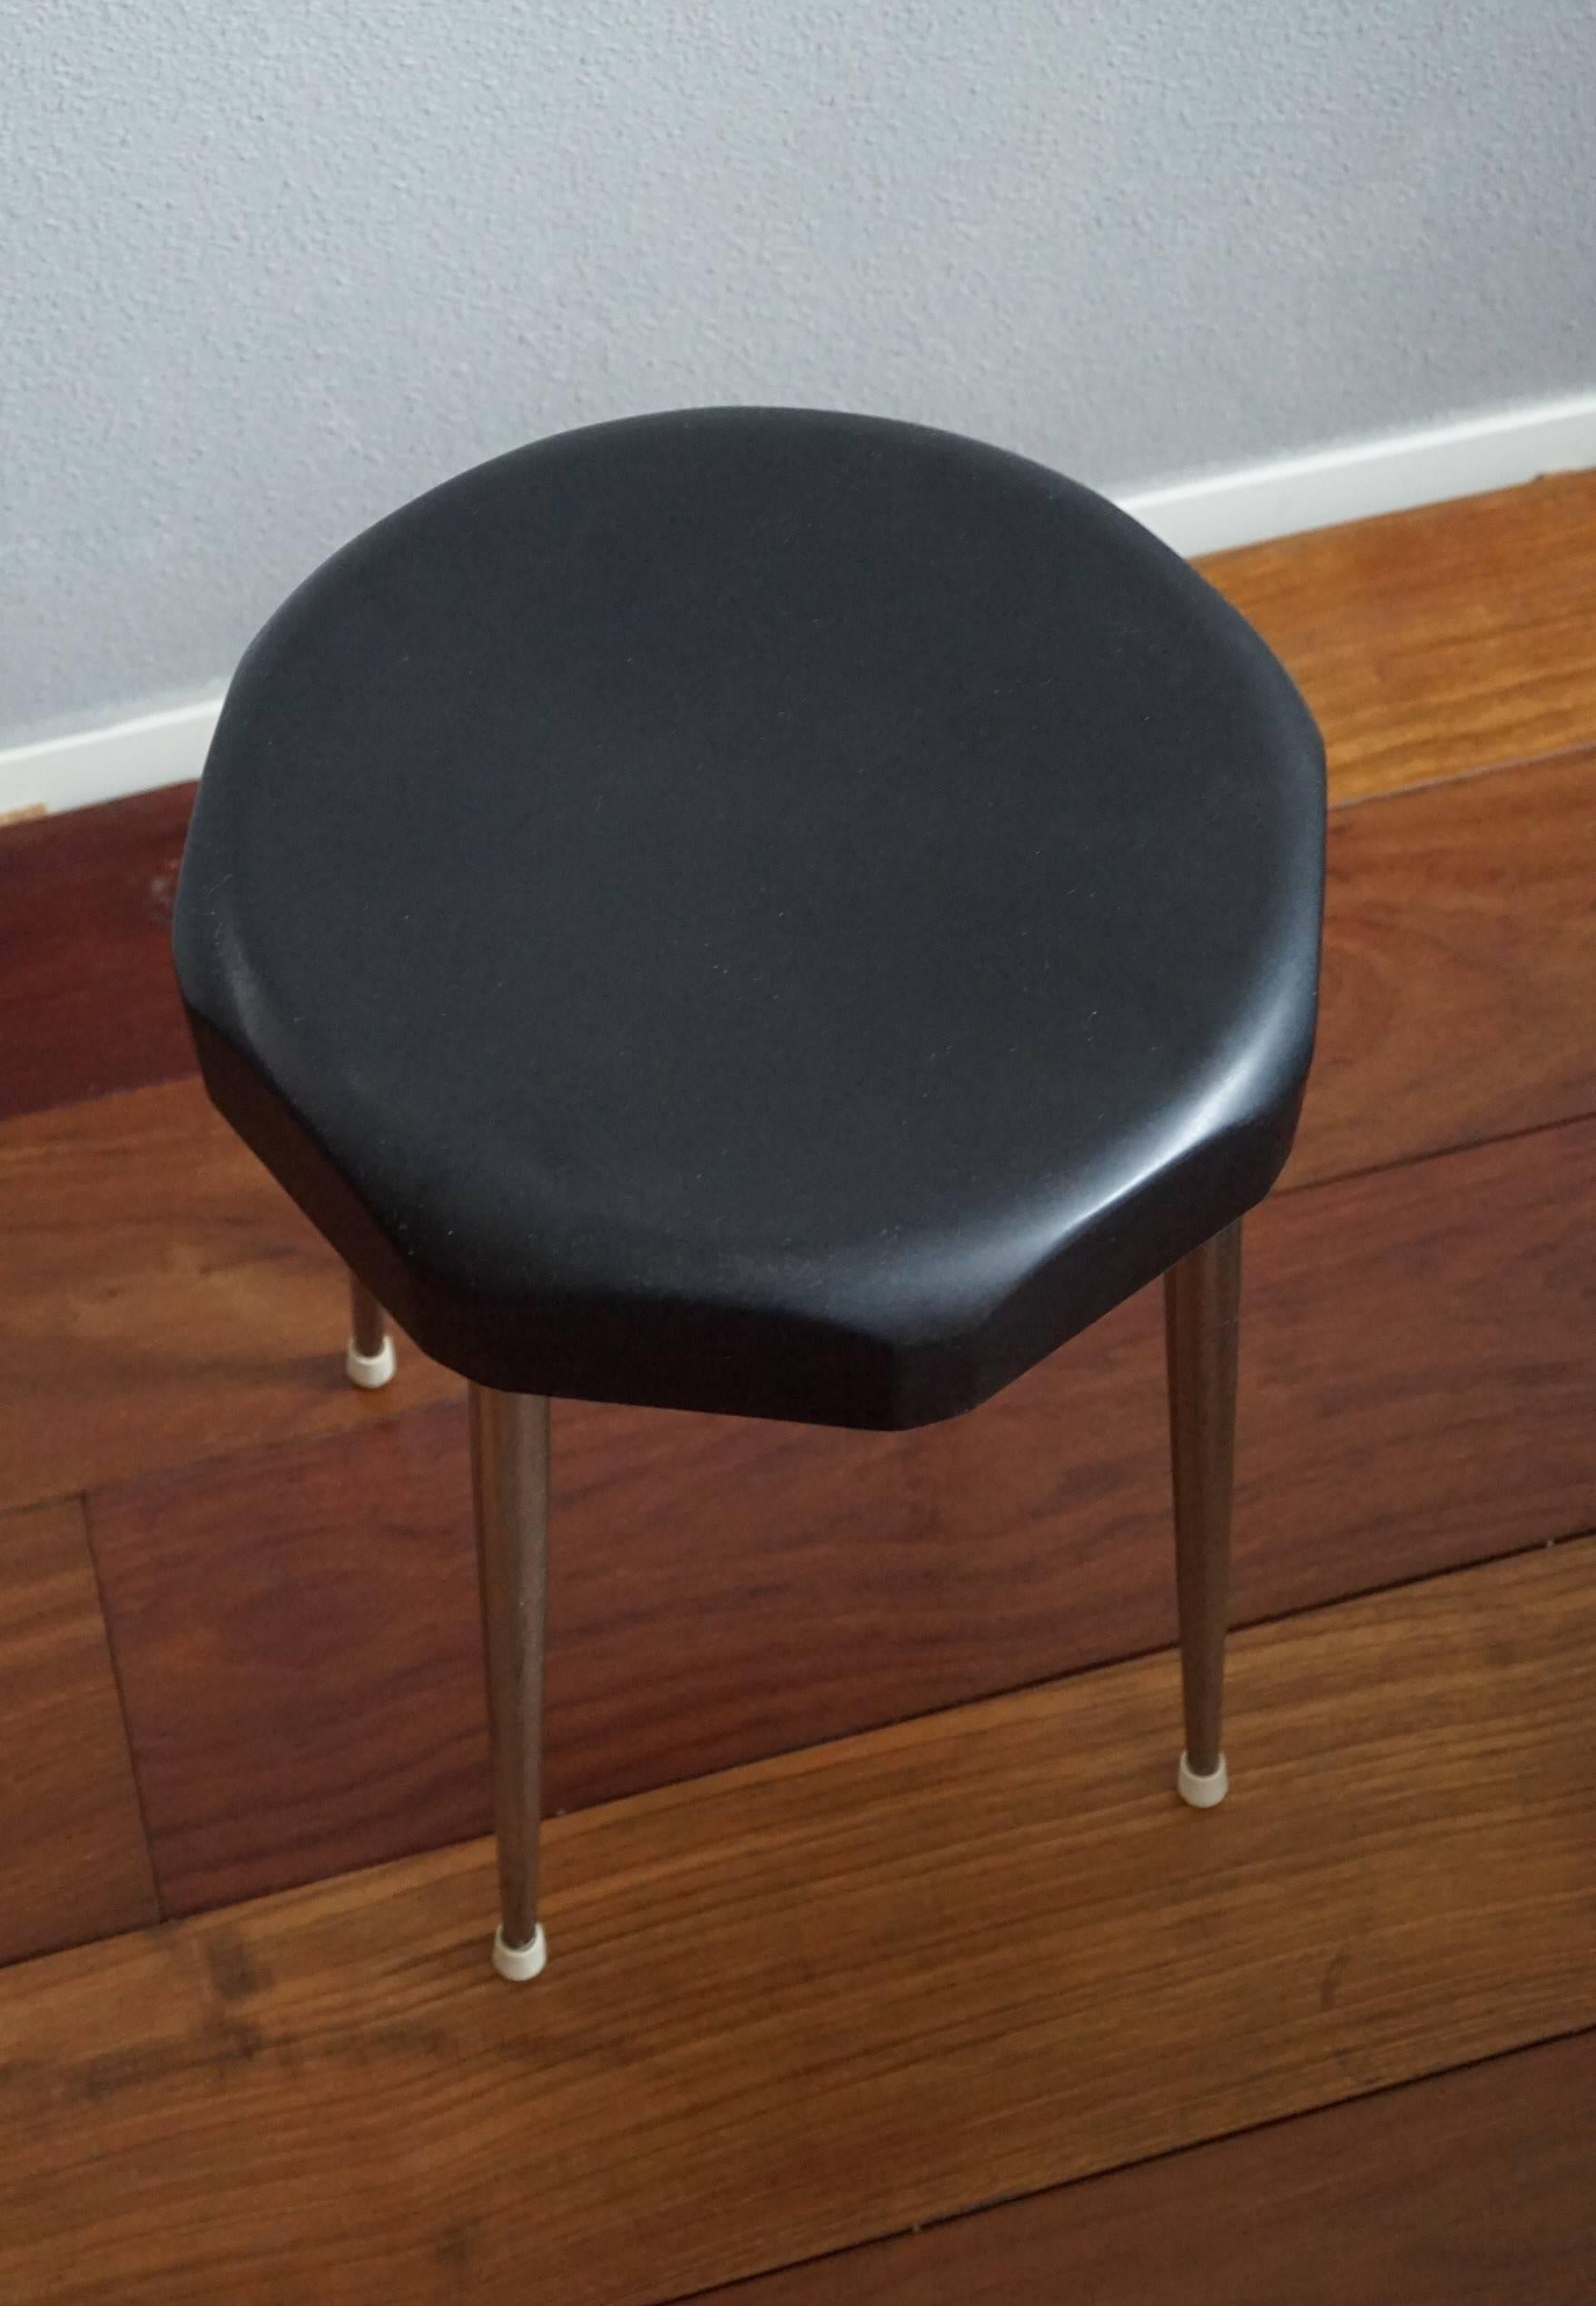 Midcentury Design Stool Chrome Legs and Bakelite Seat Great Shape and Condition 2